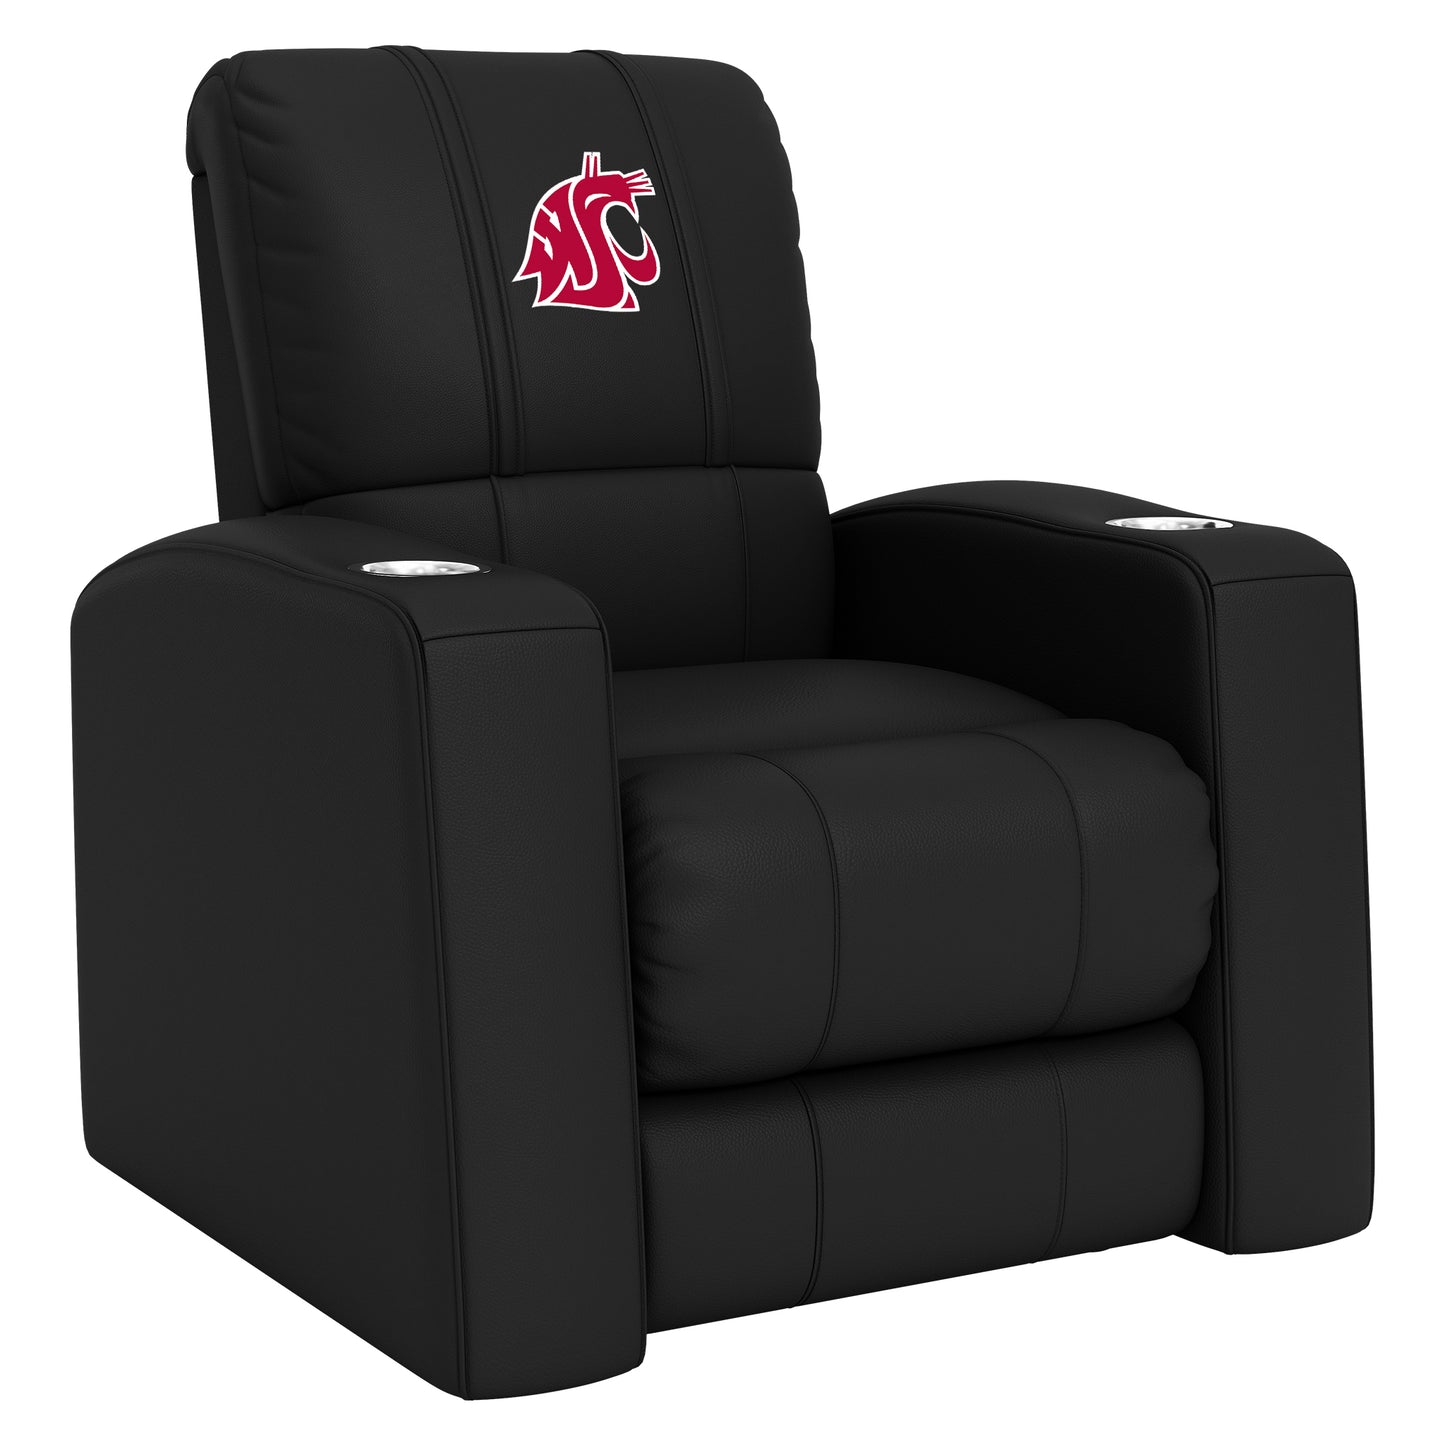 Relax Home Theater Recliner with Washington State Cougars Logo